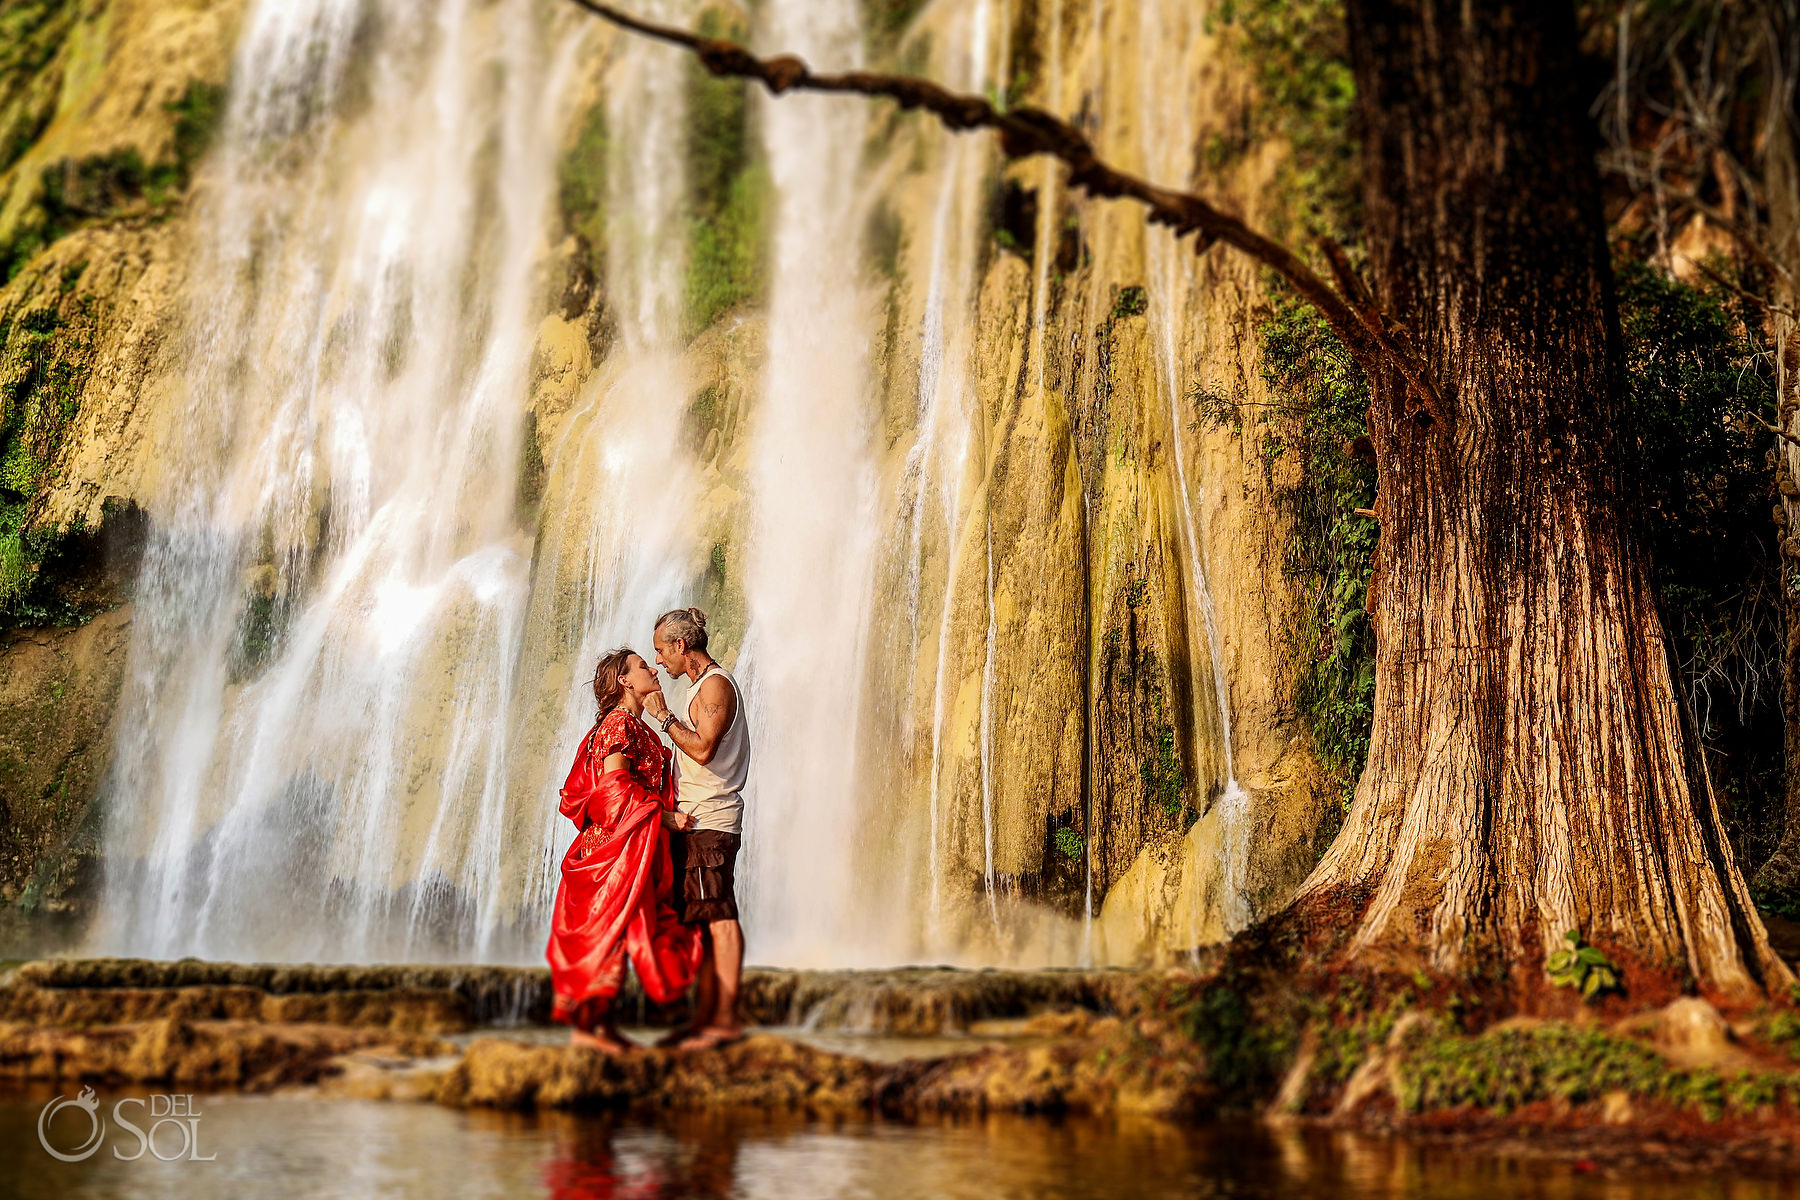 Elopement ideas for adventurous Couples waterfall Ceremony